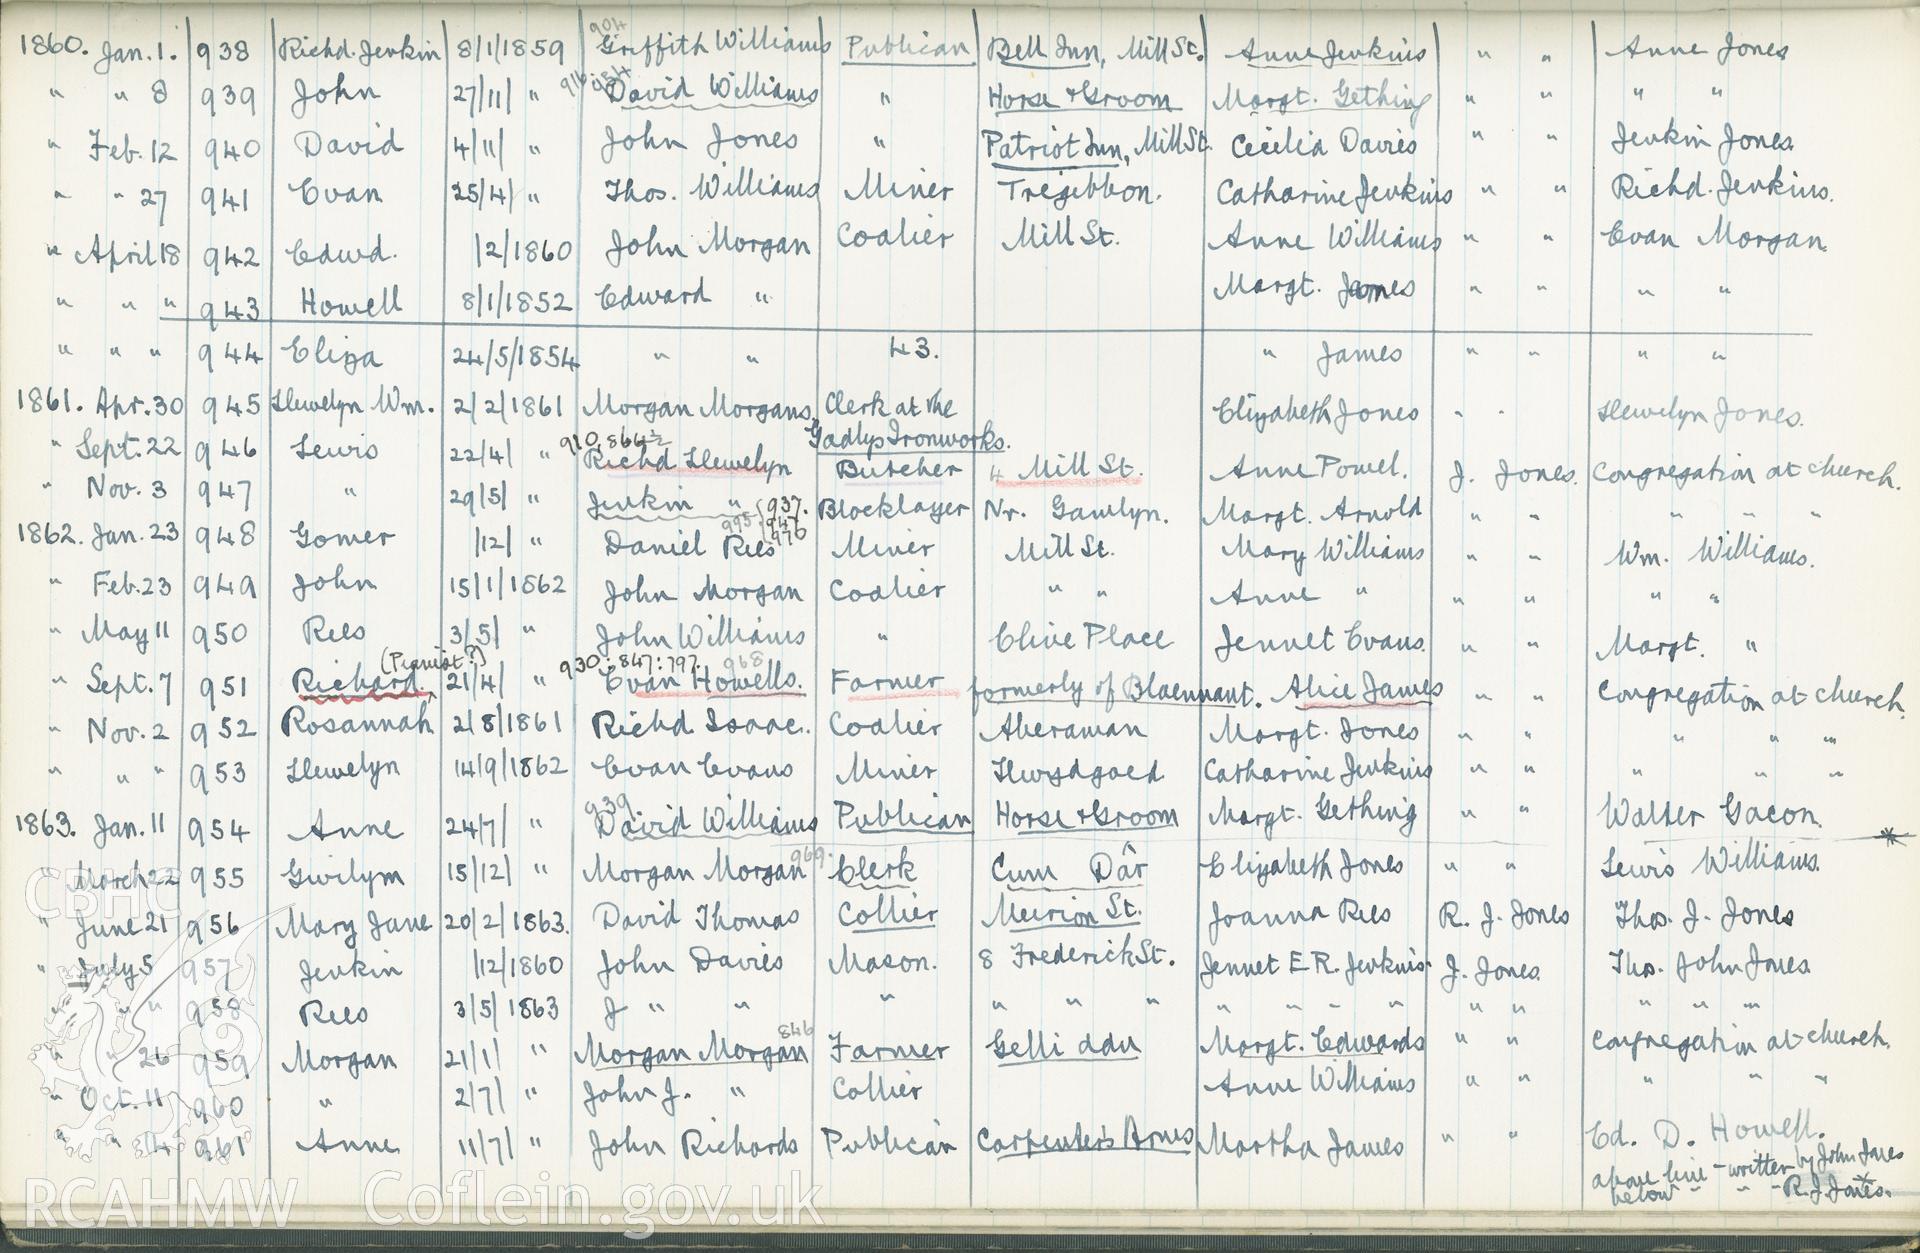 "Baptism Registered" book for Hen Dy Cwrdd, made between April 19th and 28th, 1941, by W. W. Price. Page listing baptisms from 1st January 1860 to 14th October 1863. Donated to the RCAHMW as part of the Digital Dissent Project.